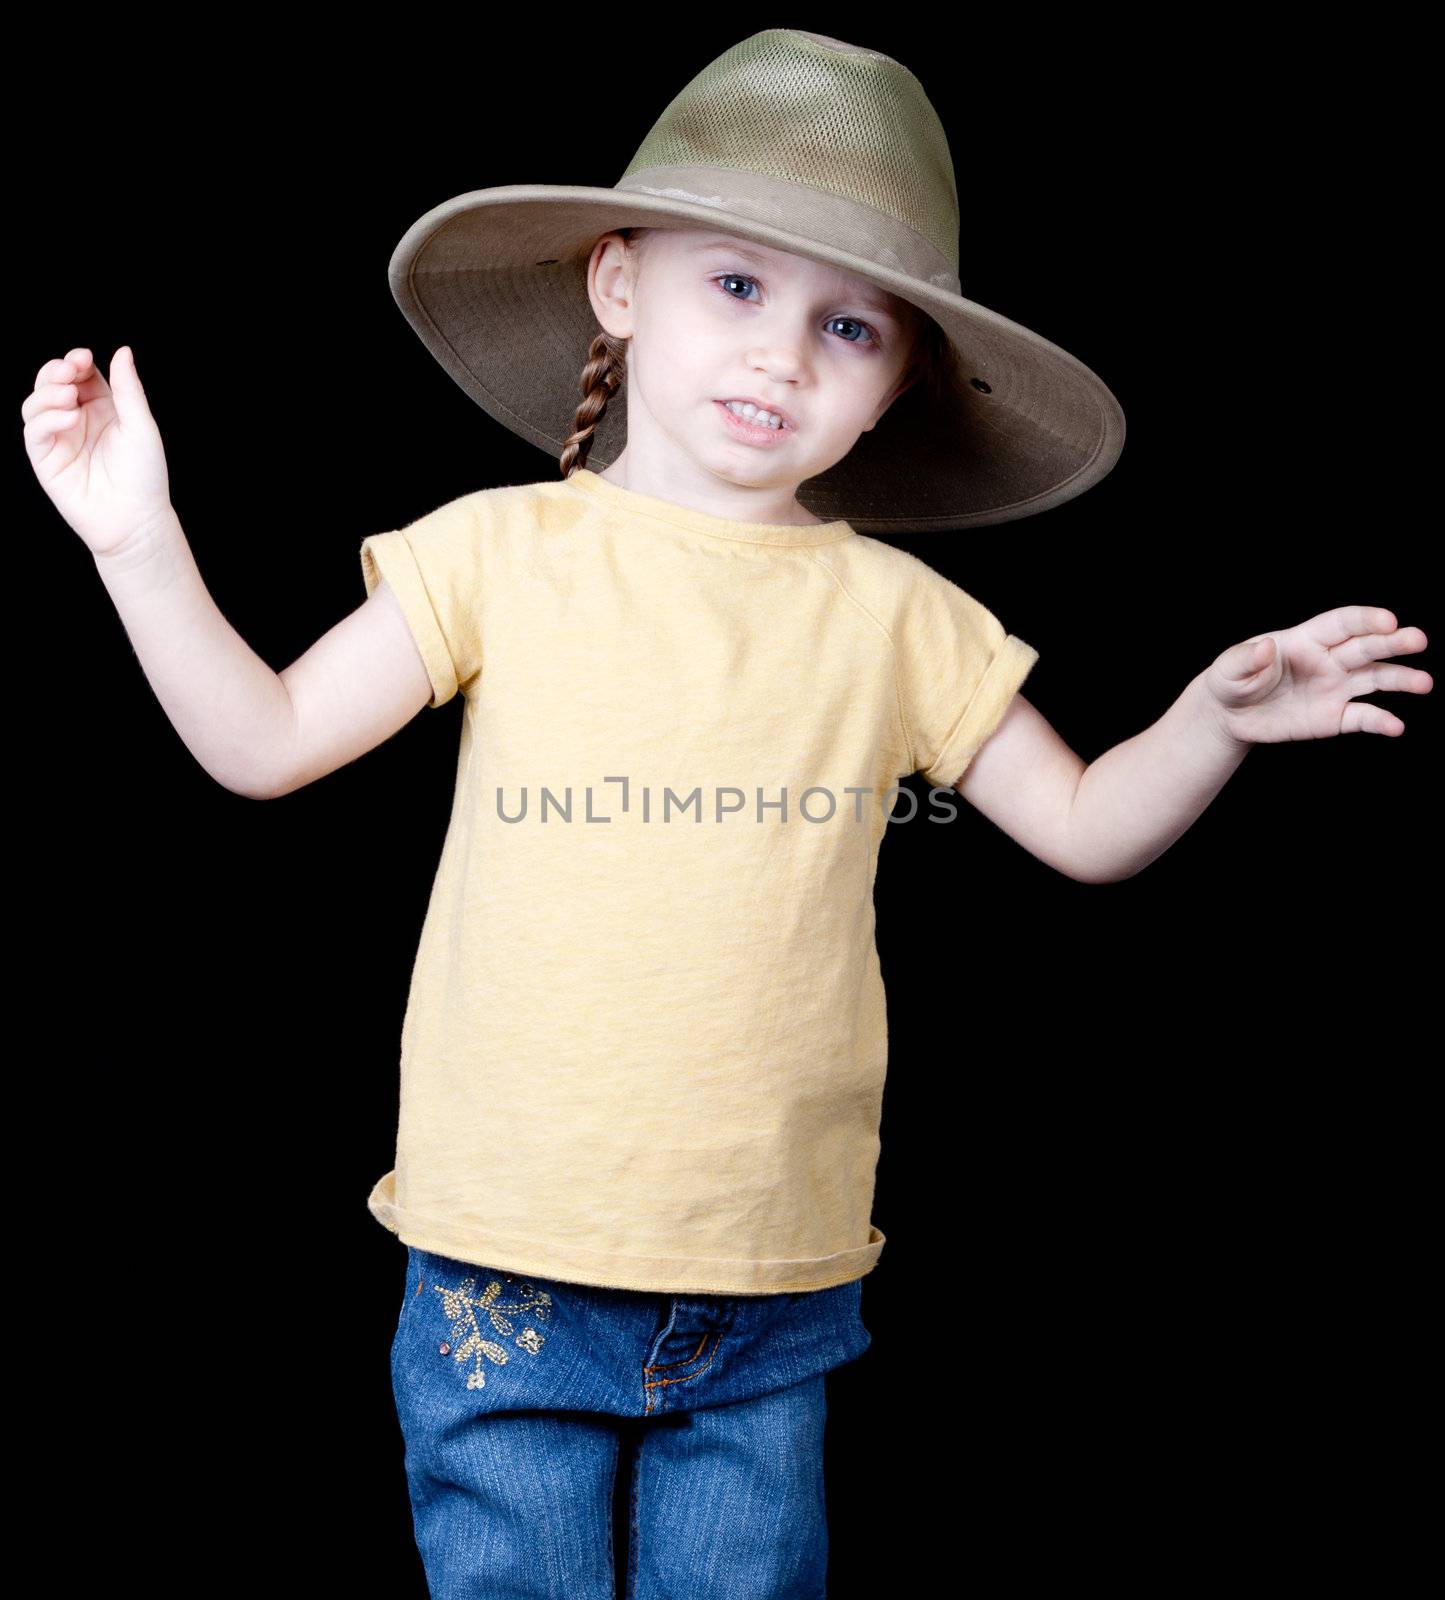 An adorable young child with an oversized hat on.  She looks as if she is explaining something.